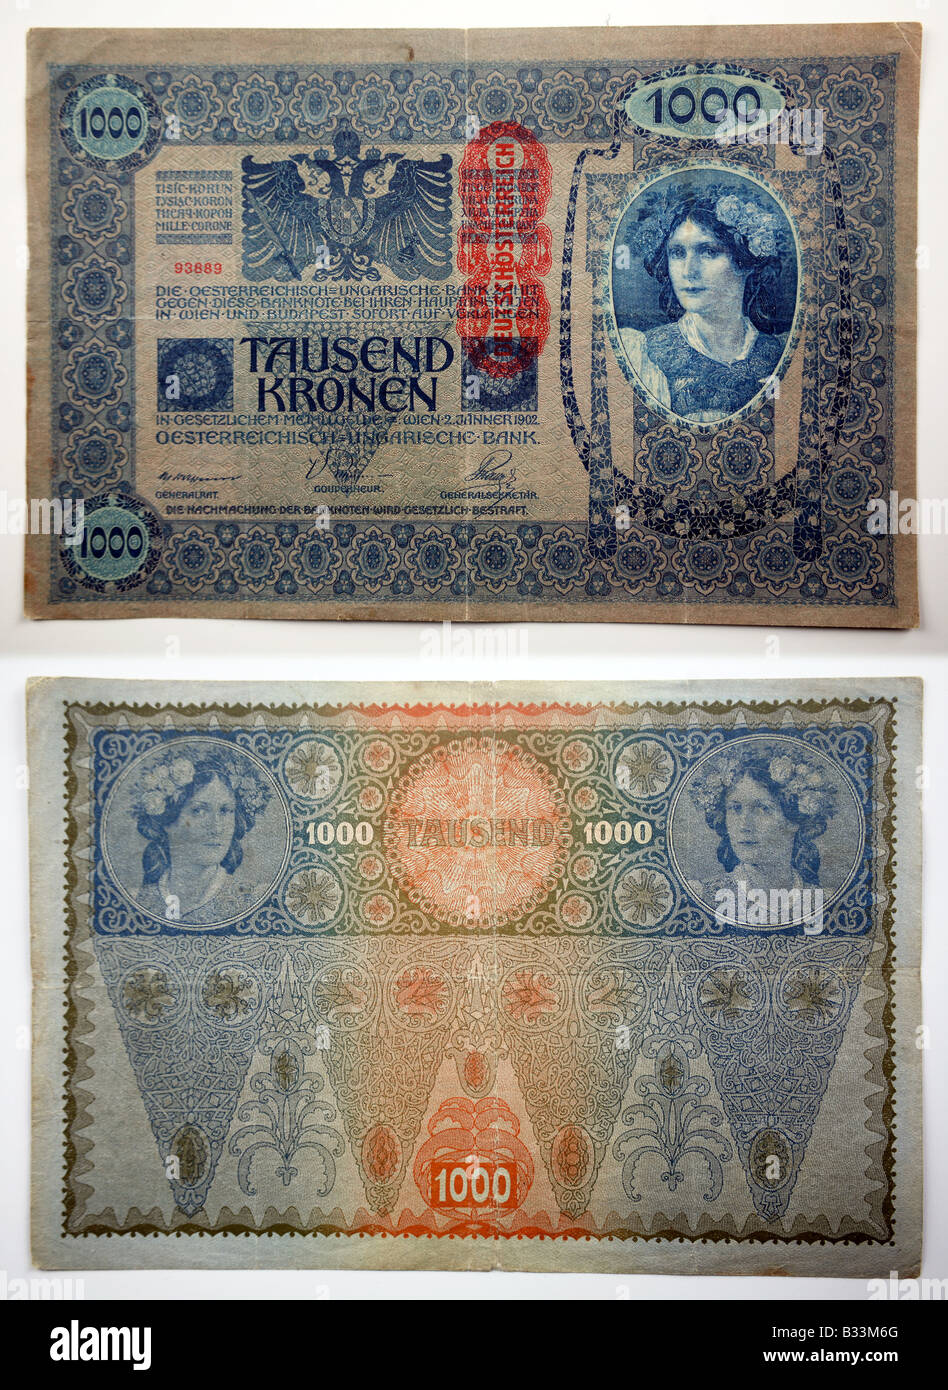 This bill is a banknote from Austria - not Germany. 'Kronen' was name of the Austrian currency in the early 20th century. The no Stock Photo